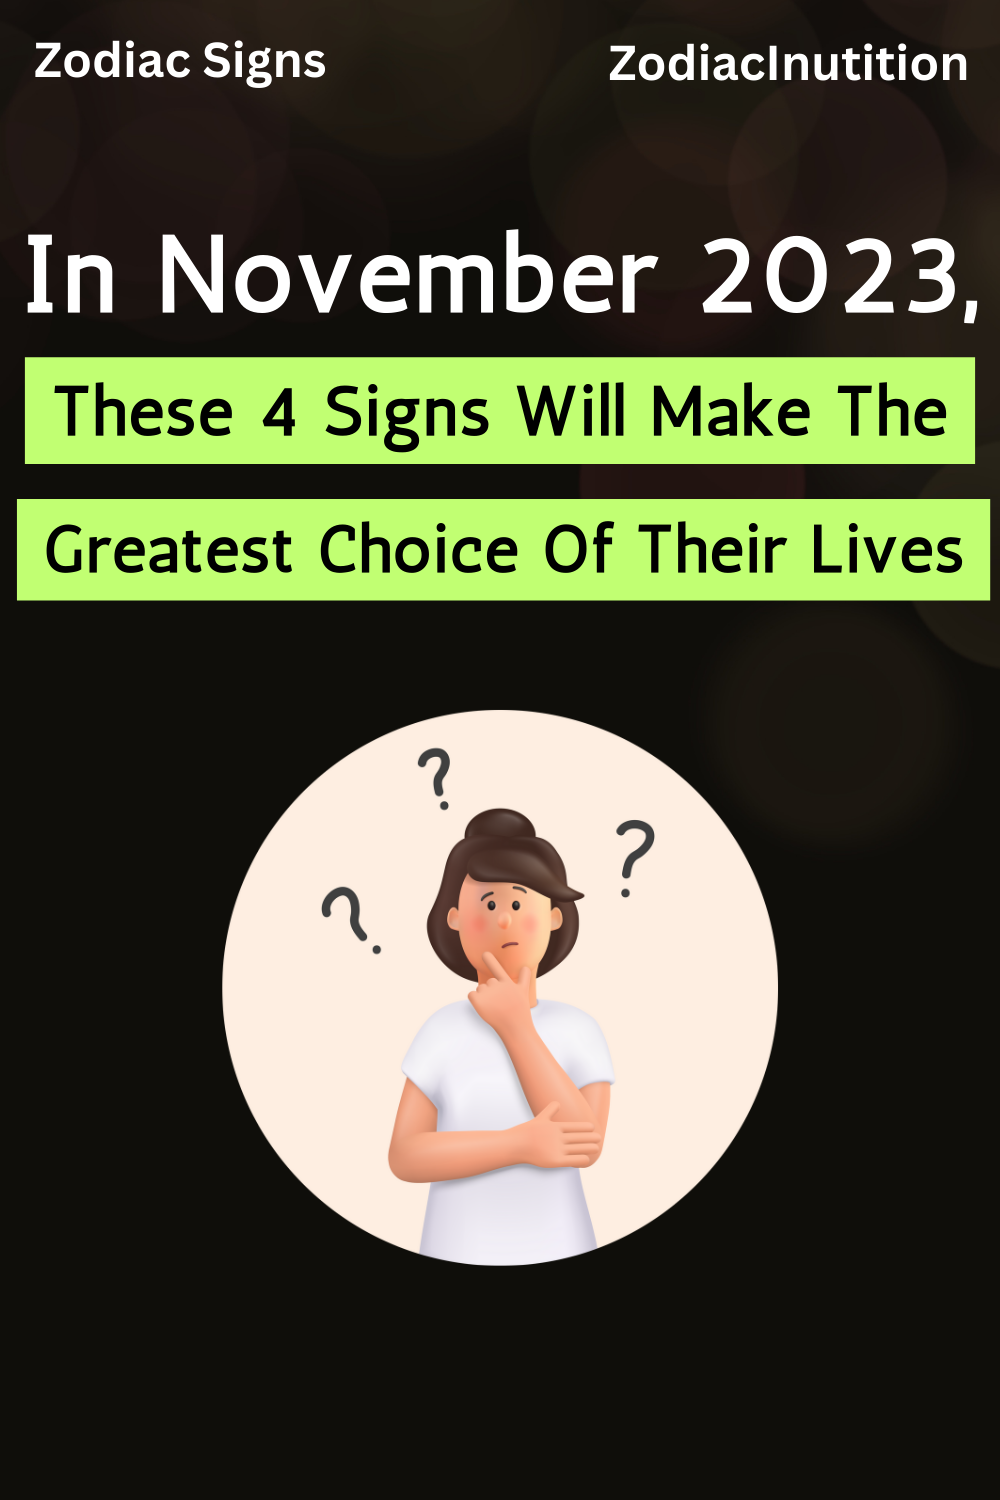 In November 2023, These 4 Signs Will Make The Greatest Choice Of Their Lives